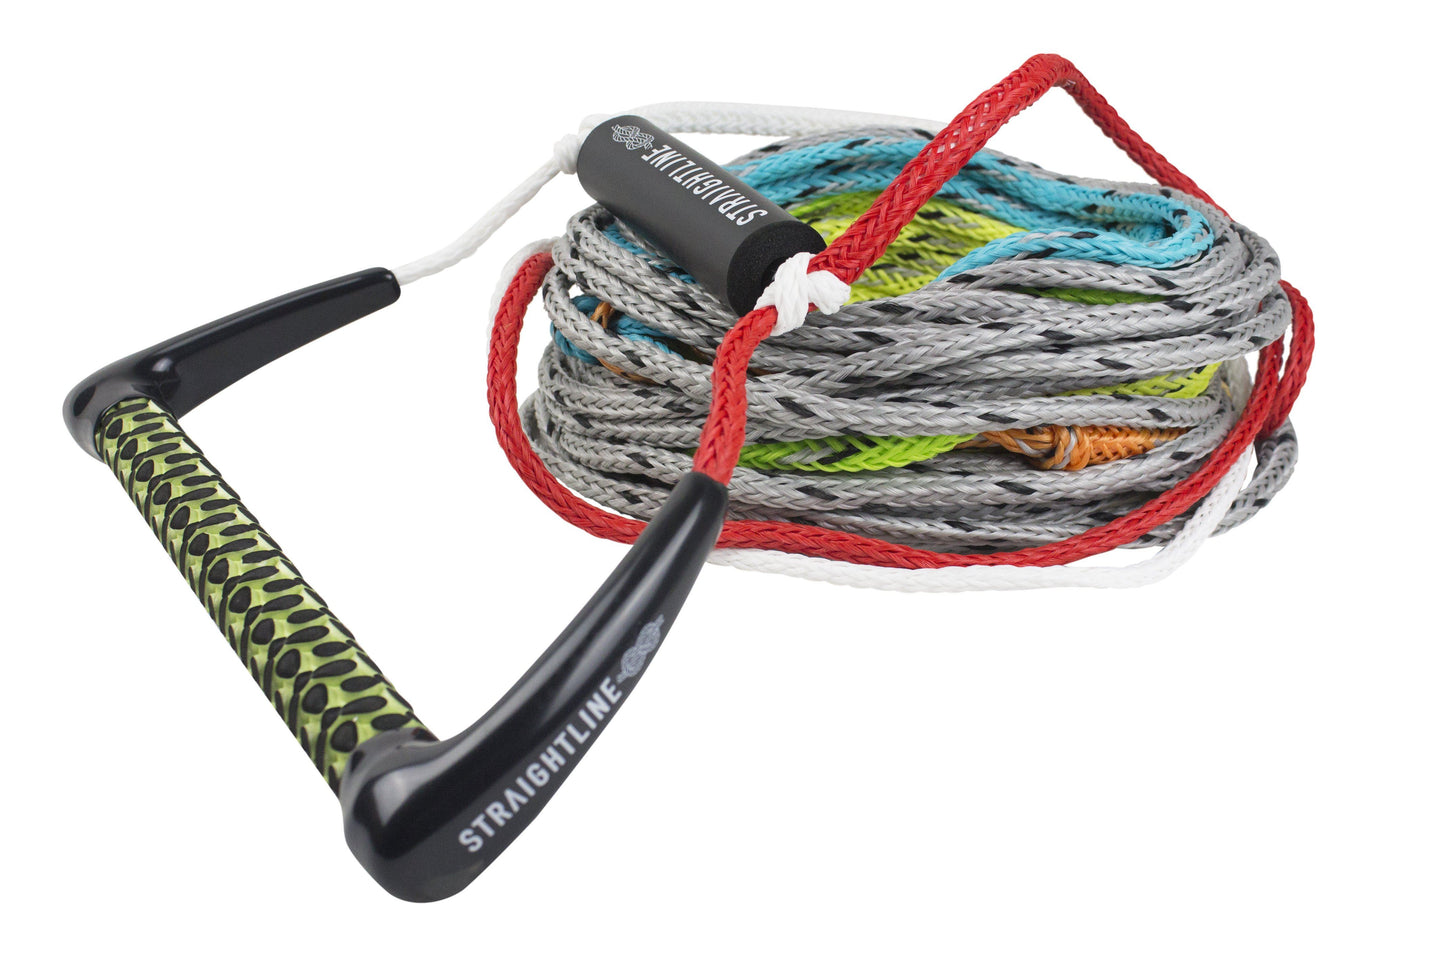 Team Lv Eva Handle W/ 5 Section Watersports - Ropes And Handles - Ski Ropes Straightline 